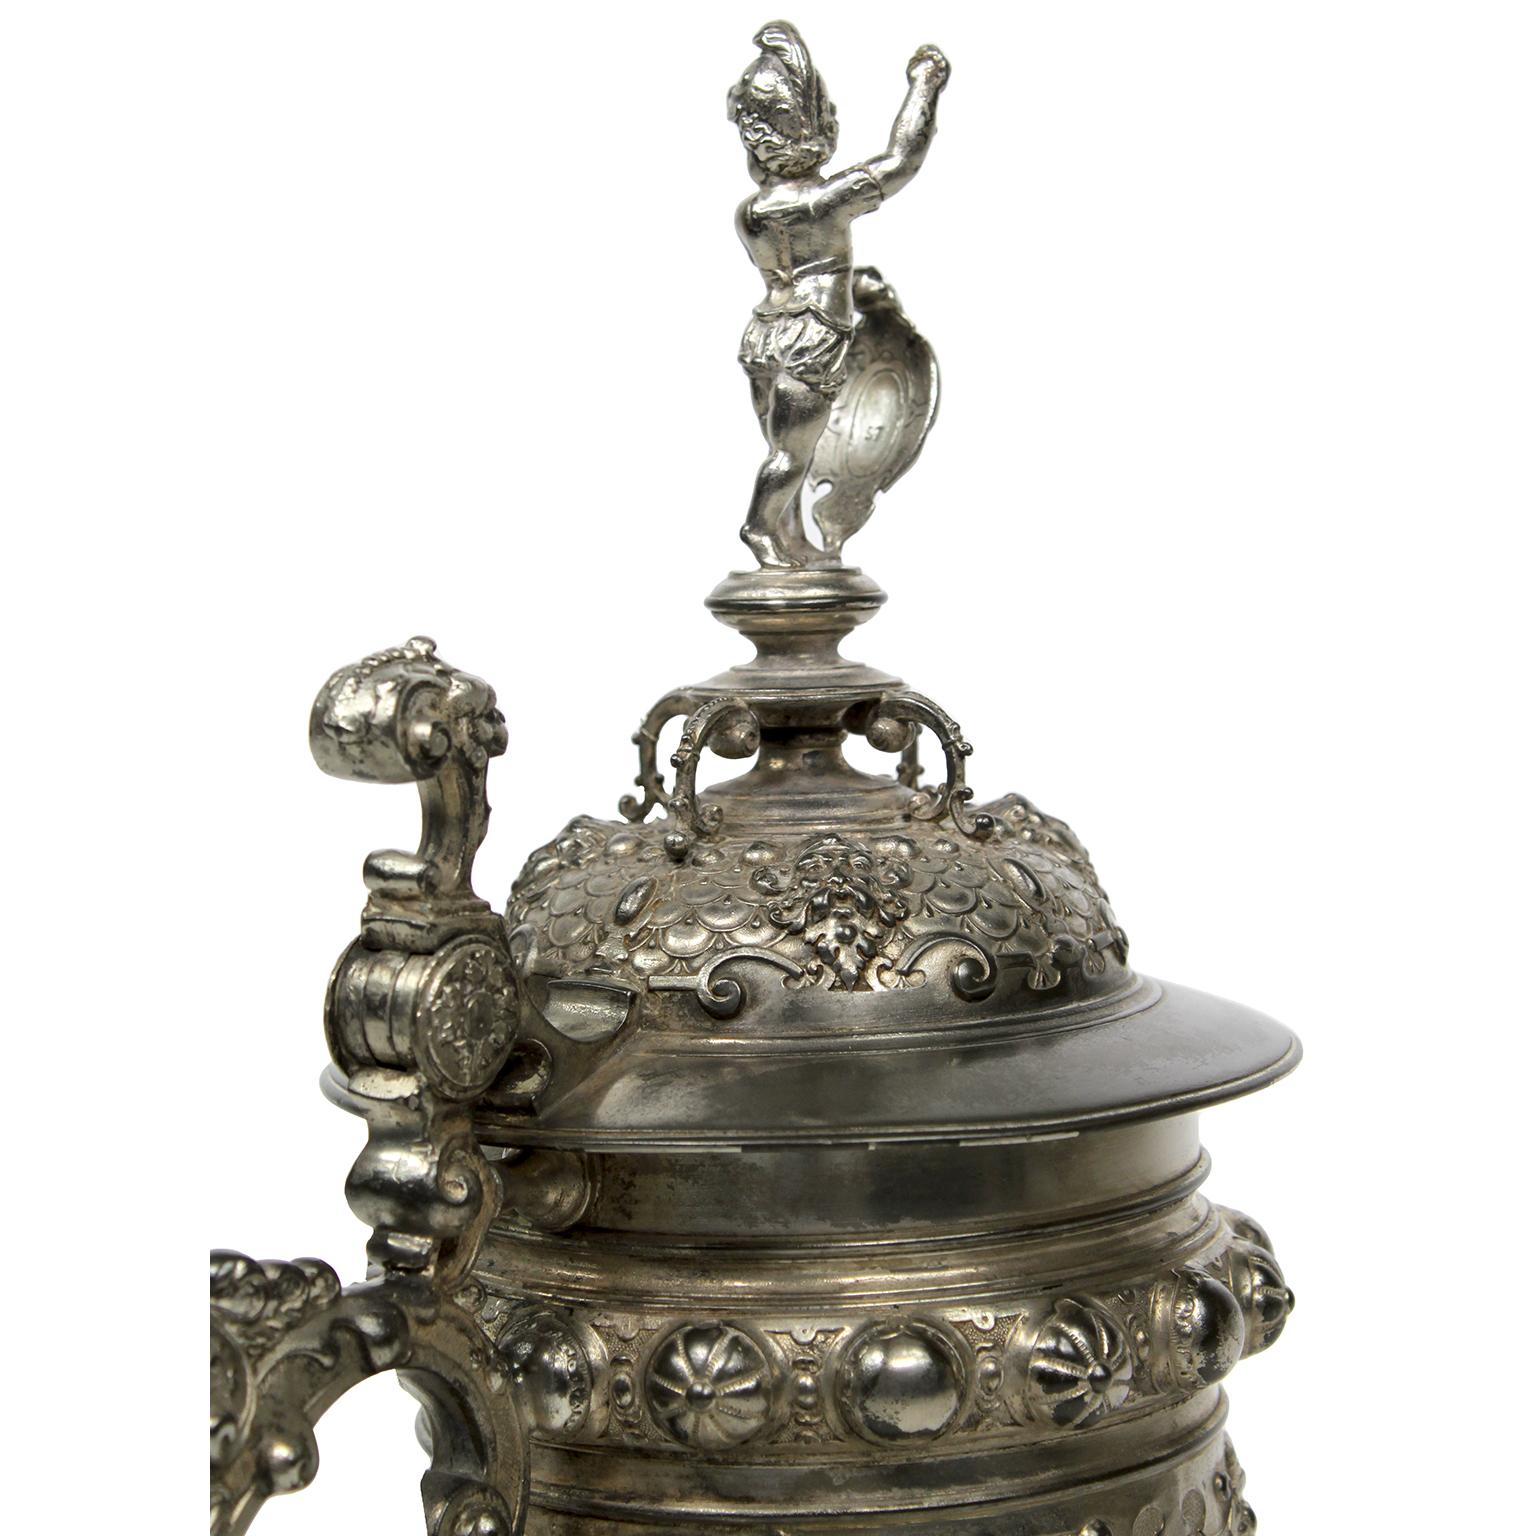 19th Century Renaissance Revival Style Britannia Silver Plated WMF Beer-Tankard For Sale 3